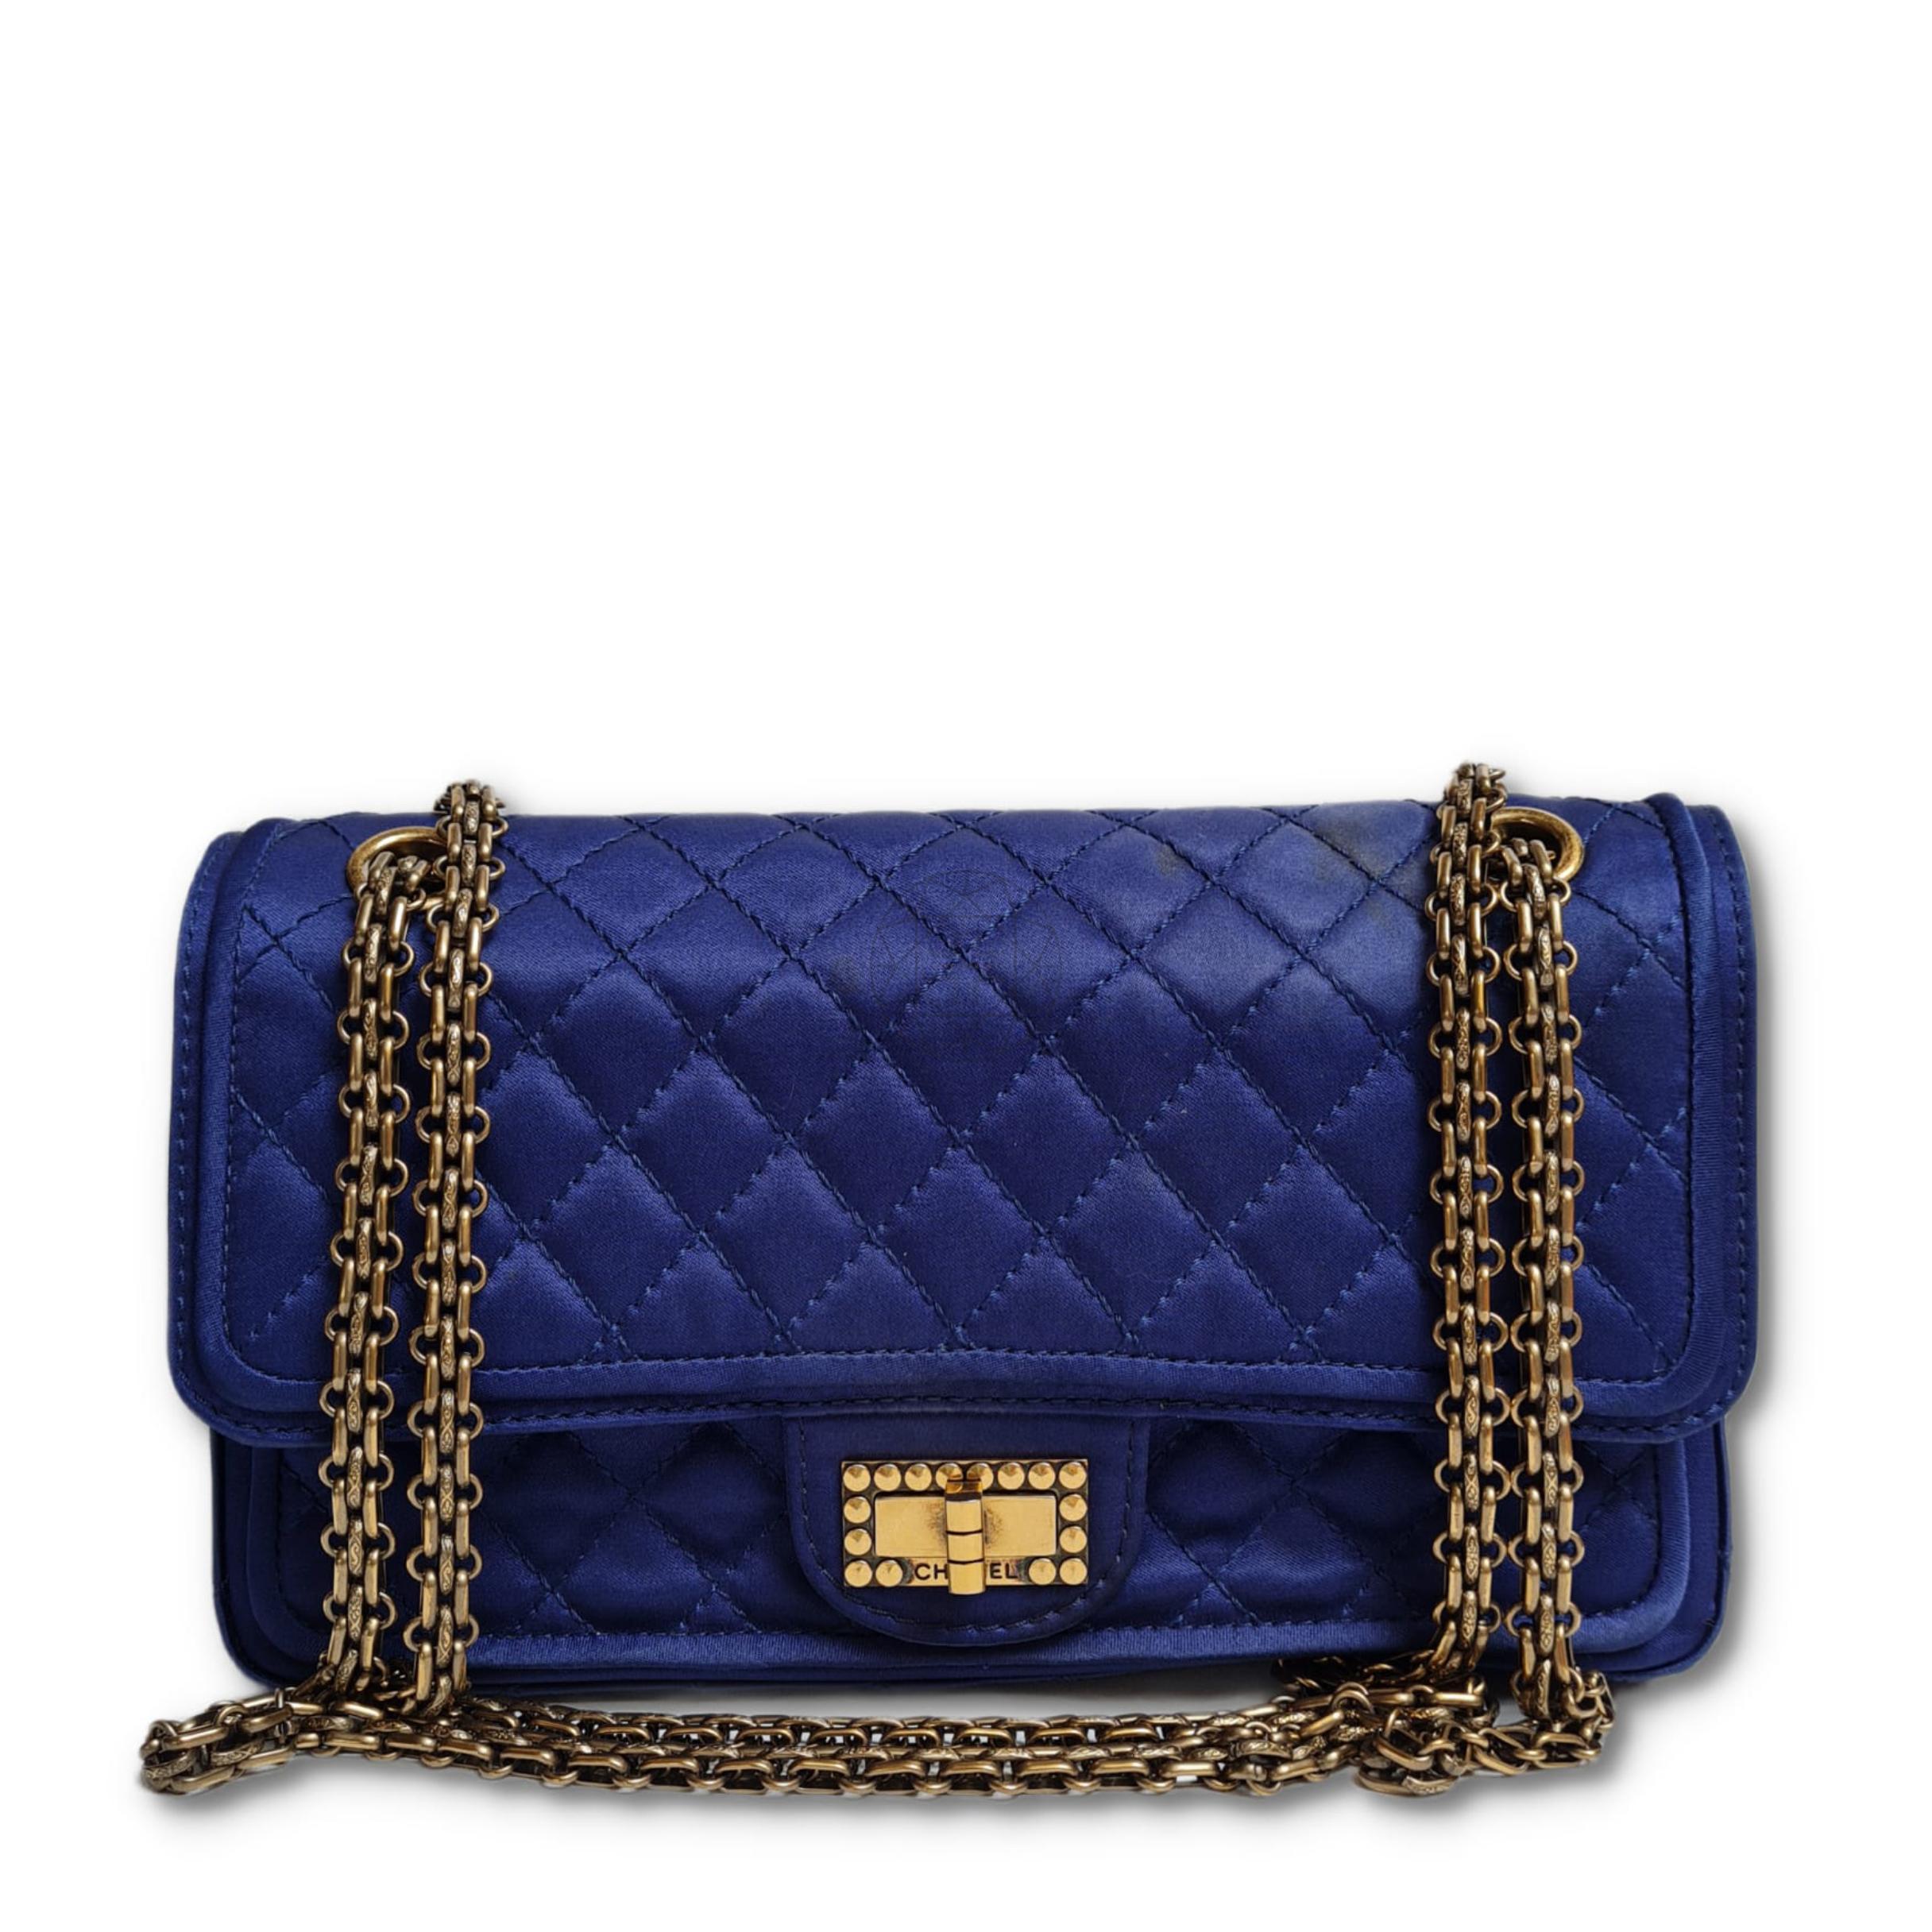 Chanel Medium Satin Quilted Reissue Flap Bag For Sale 10